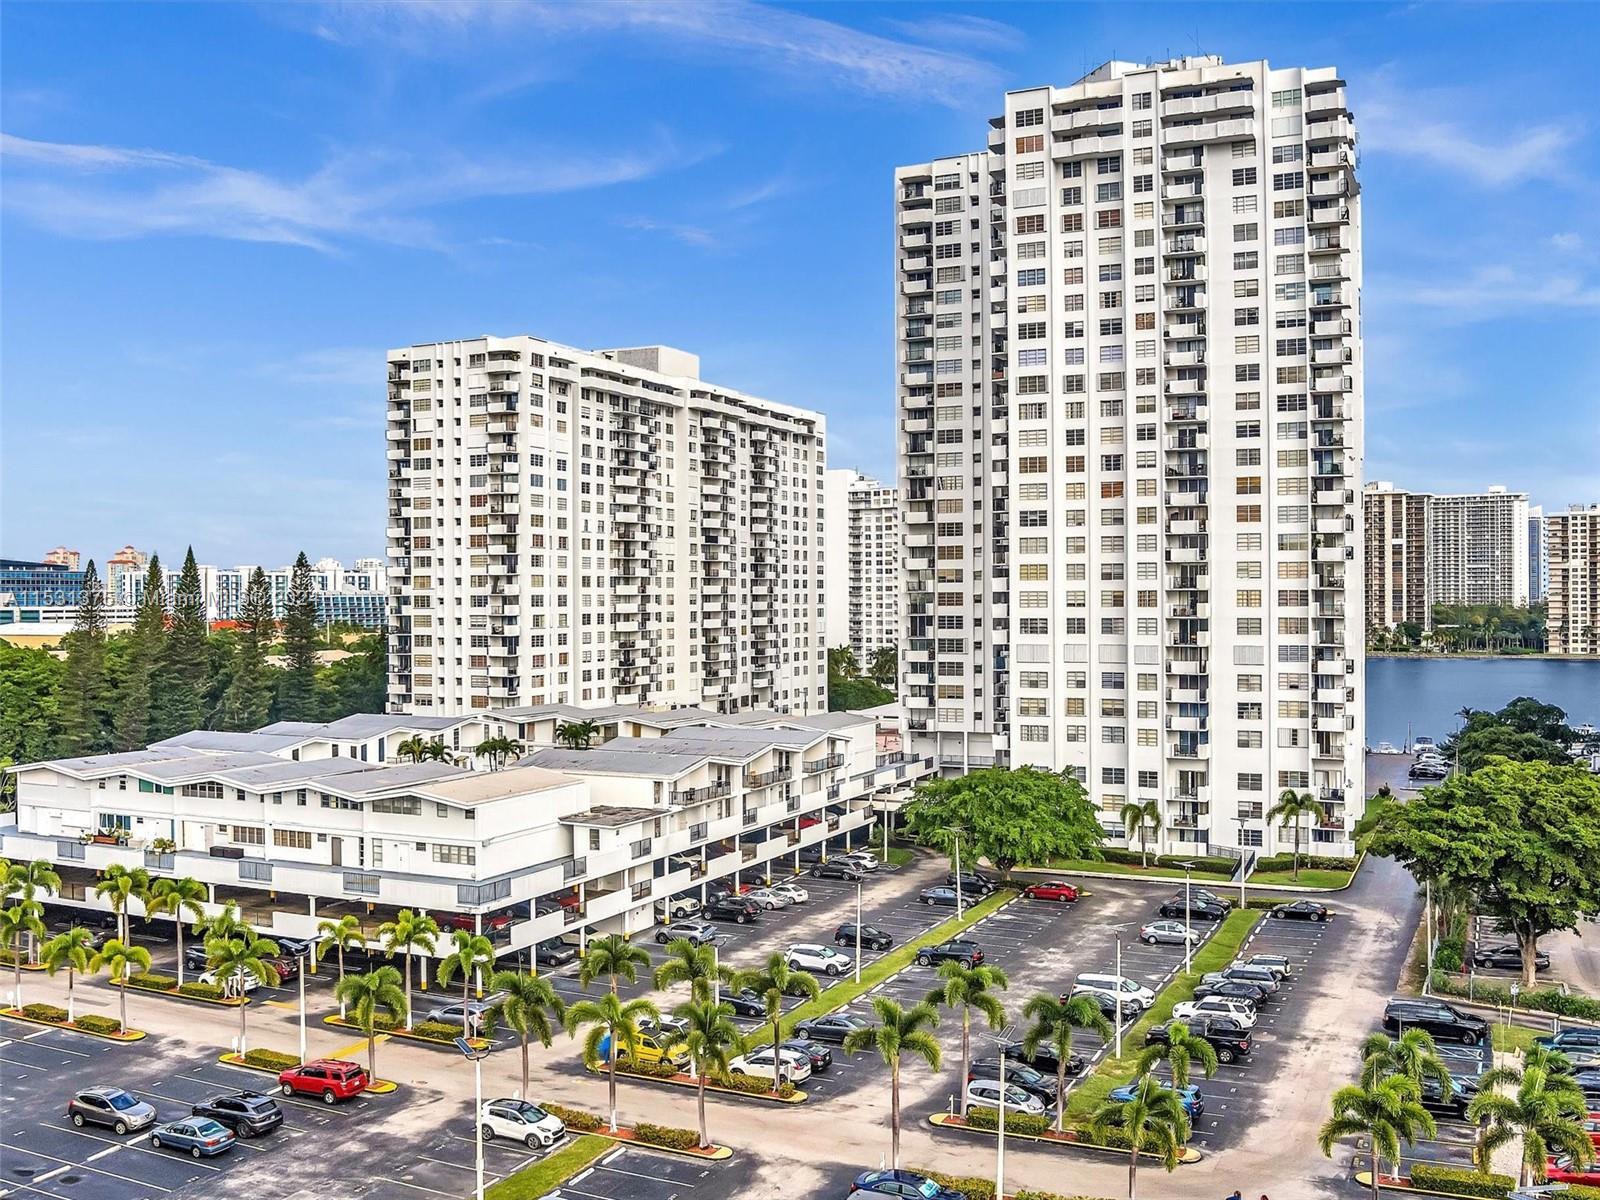 New to the market! This spacious and updated 2/2 is located in the heart of Aventura! This unit feat